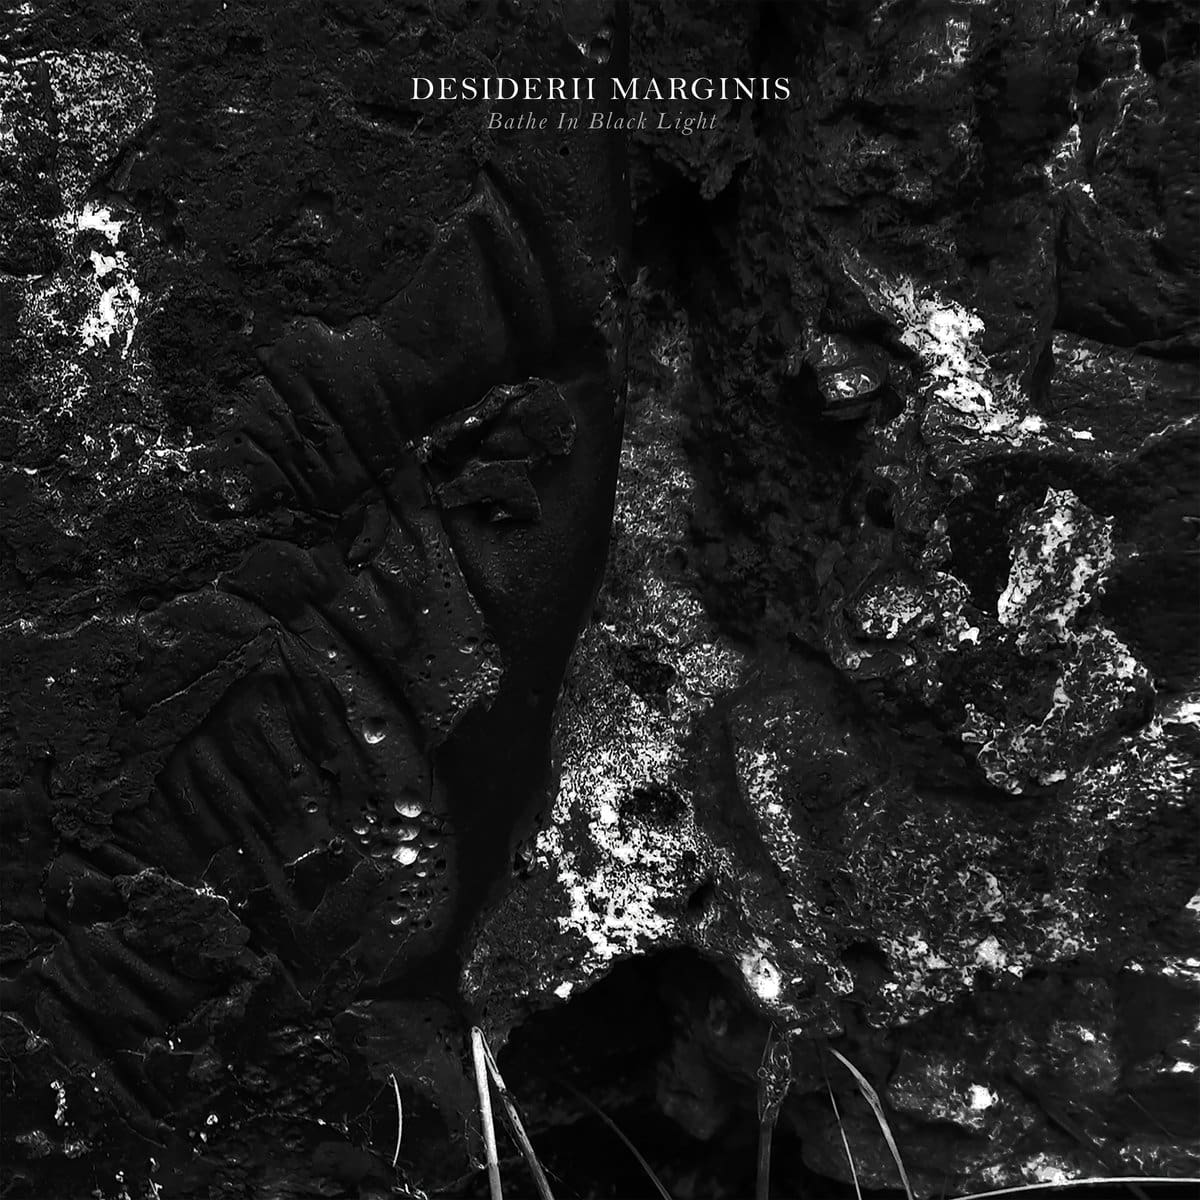 Desiderii Marginis announces new ambinet album on French label Cyclic Law